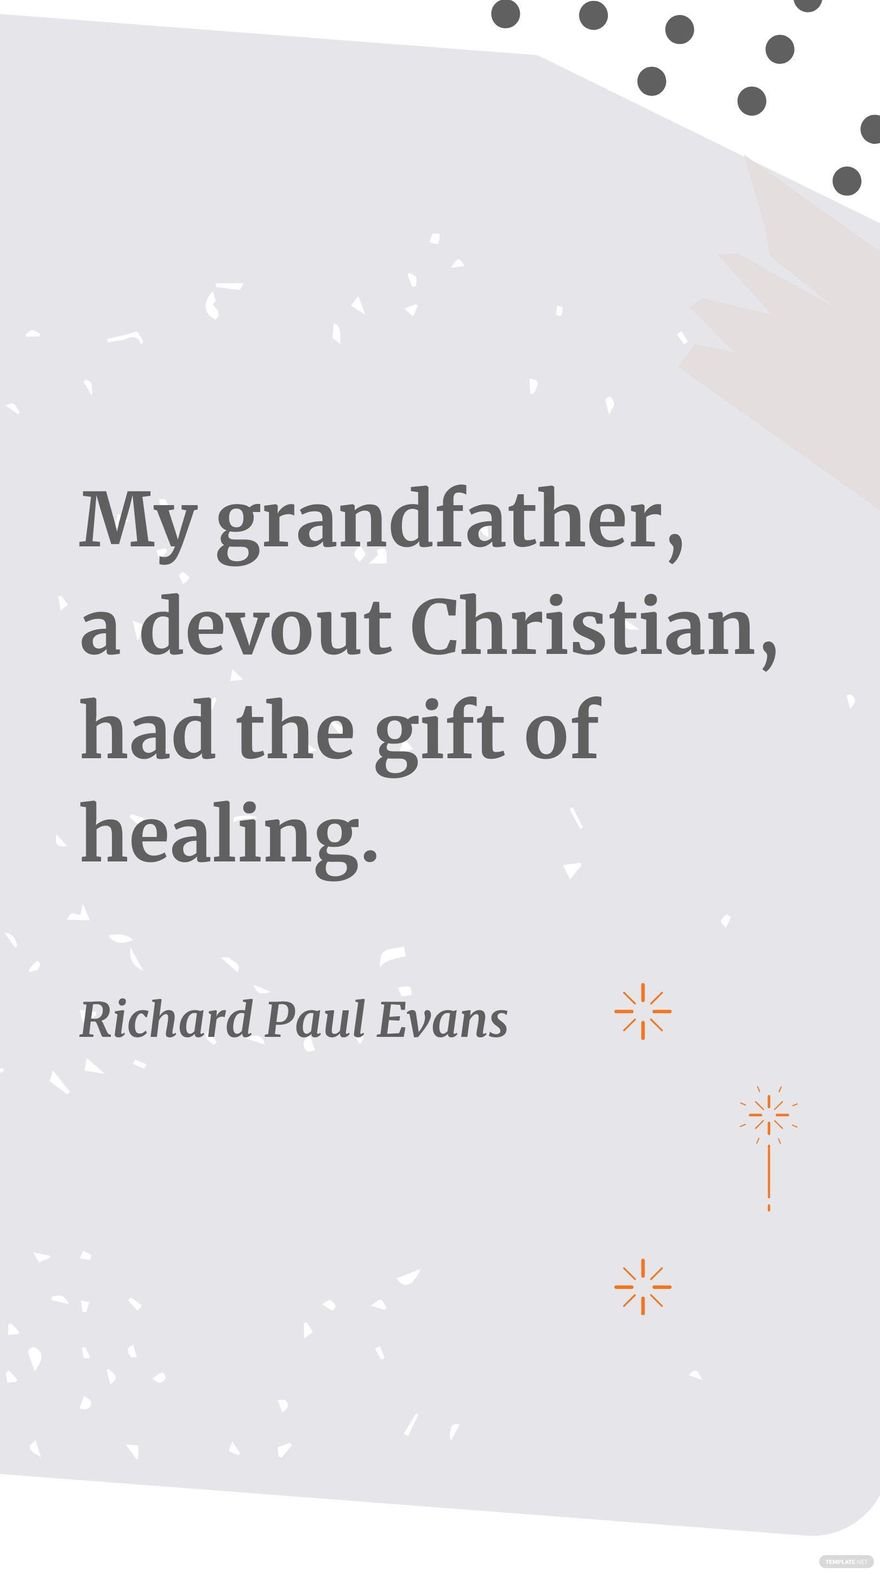 Free Richard Paul Evans - My grandfather, a devout Christian, had the gift of healing. in JPG